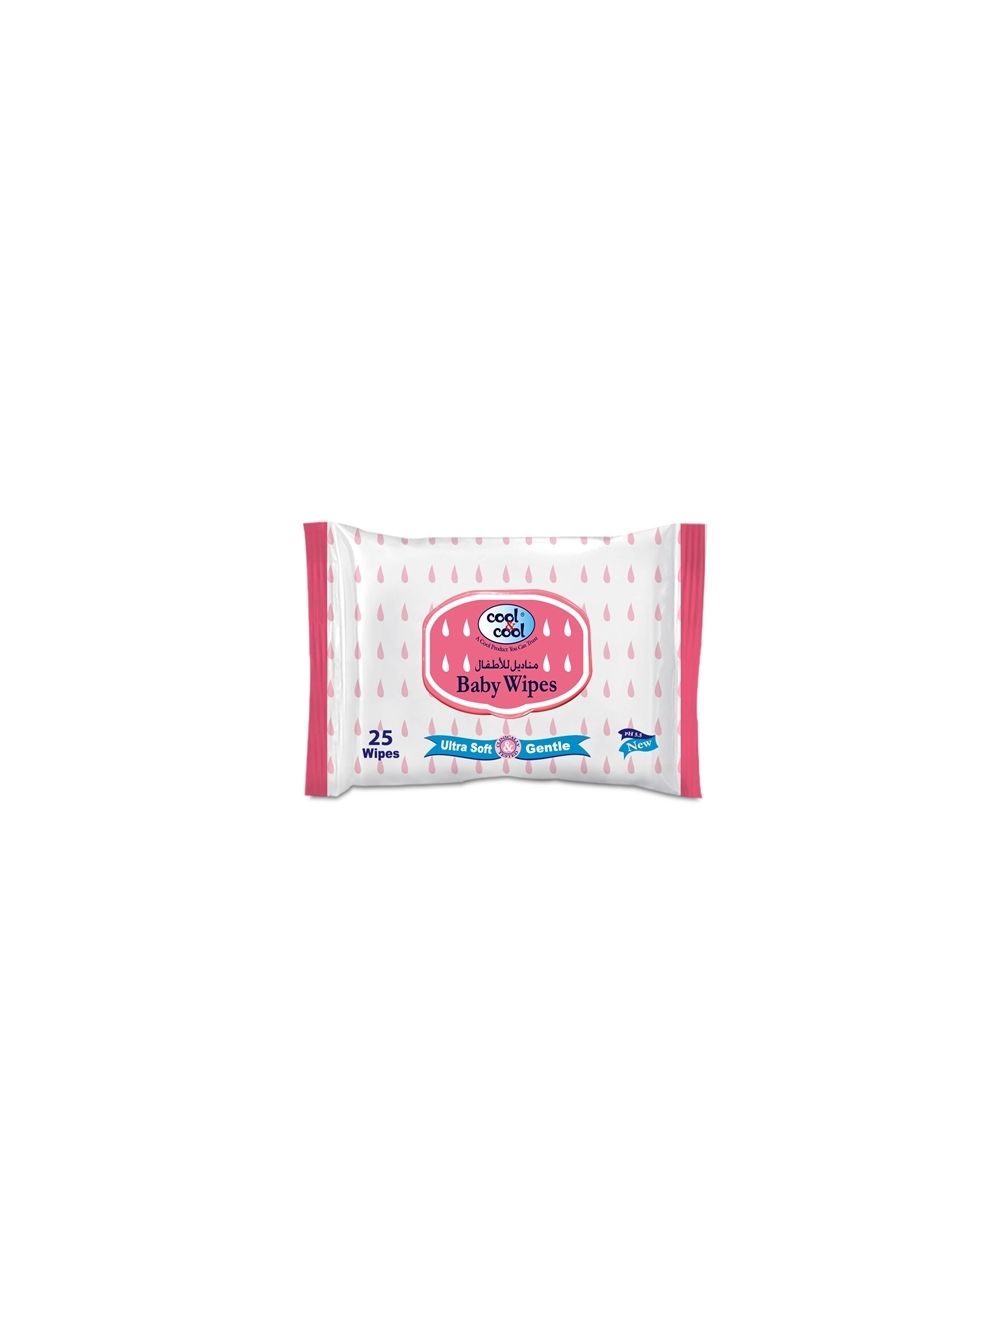 Cool & Cool Baby Wipes 25's (Travel Pack)